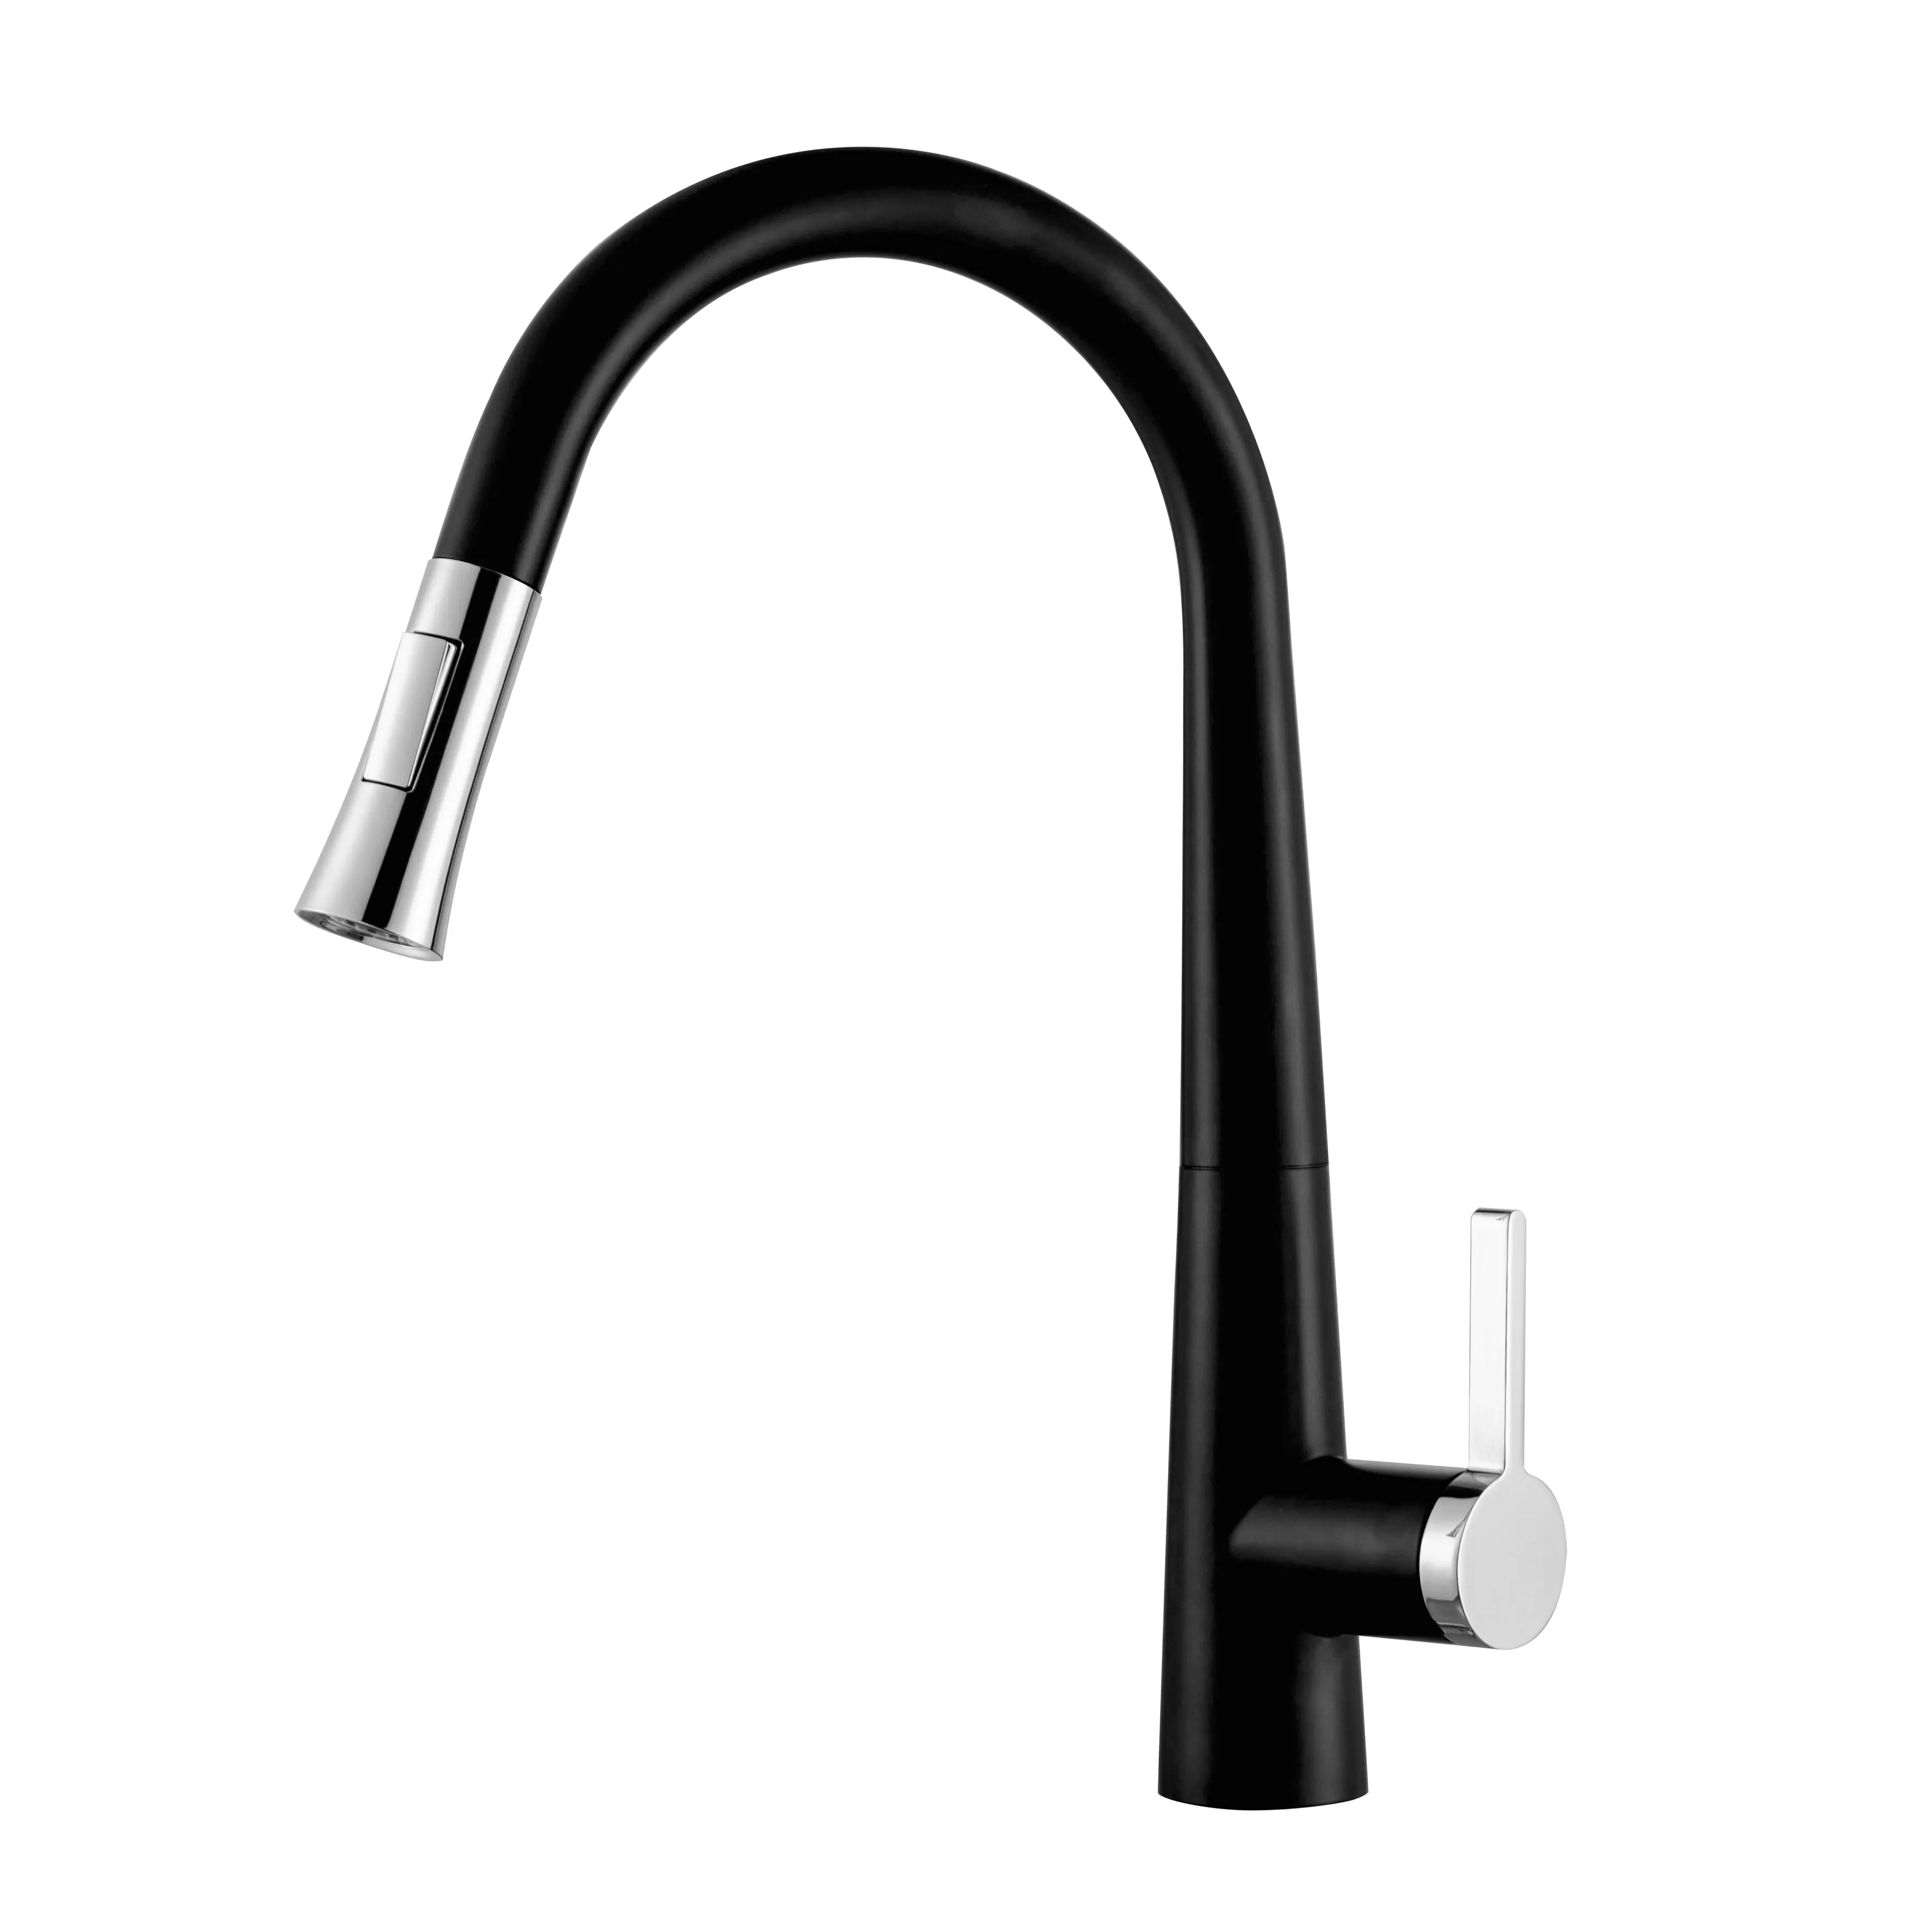 New Design Black Chrome 304 Stainless Steel Pull Down Kitchen Faucet with 2 function Spout Sprayer